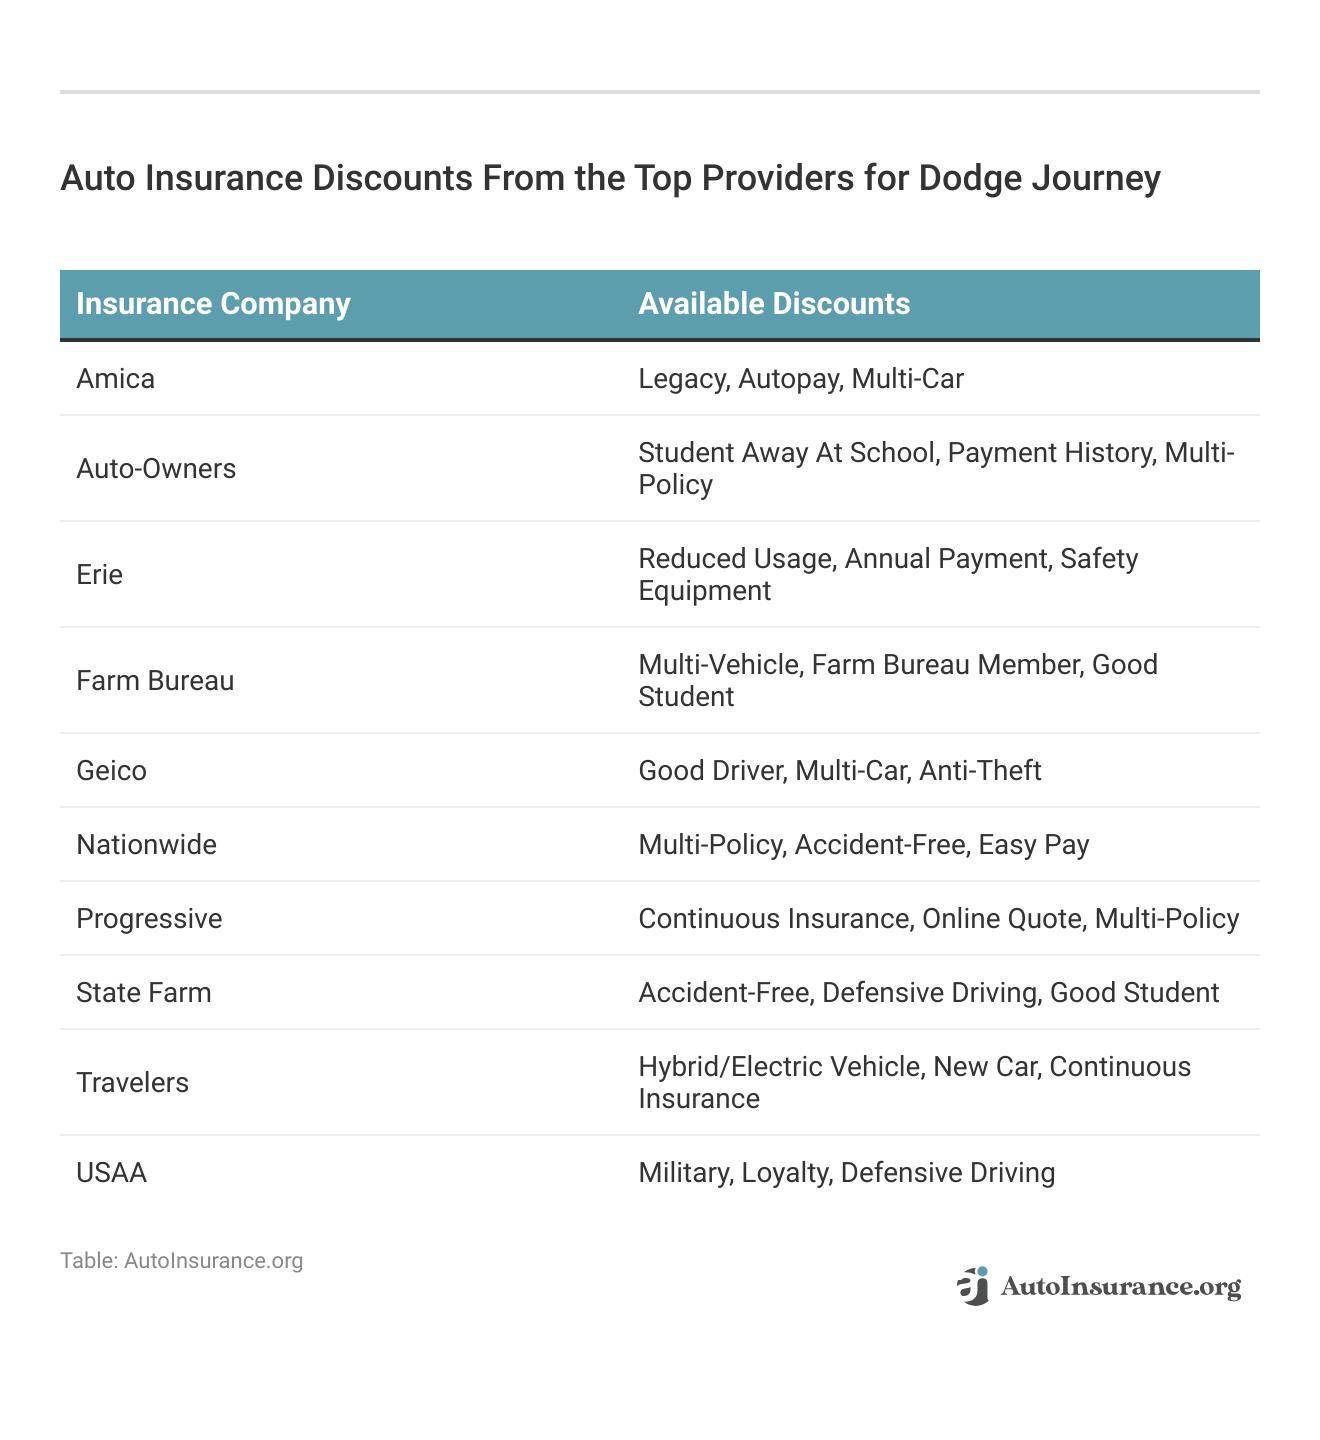 <h3>Auto Insurance Discounts From the Top Providers for Dodge Journey</h3>